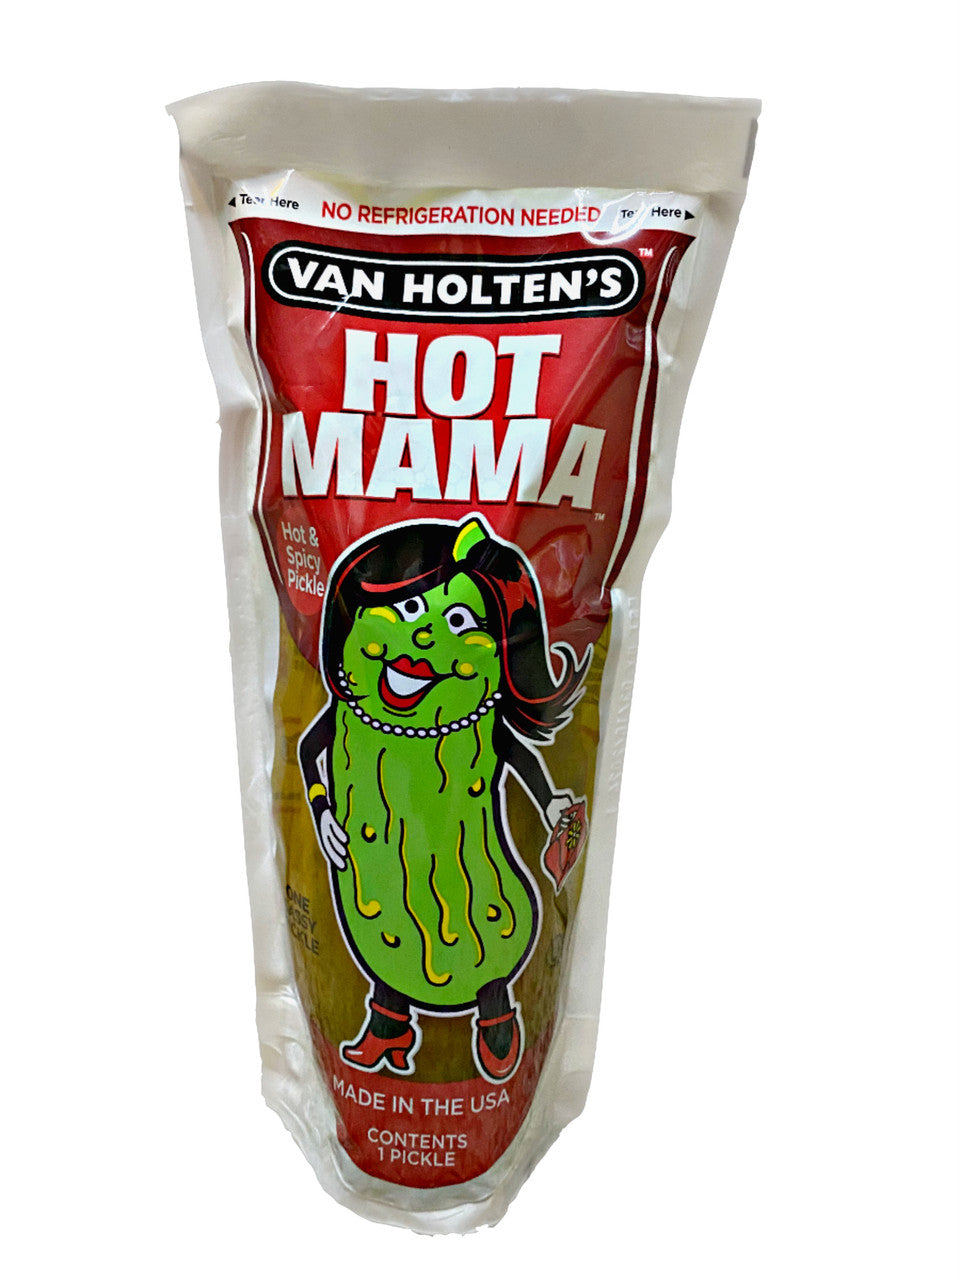 VAN HOLTENS HOT MAMA SPICY PICKLE